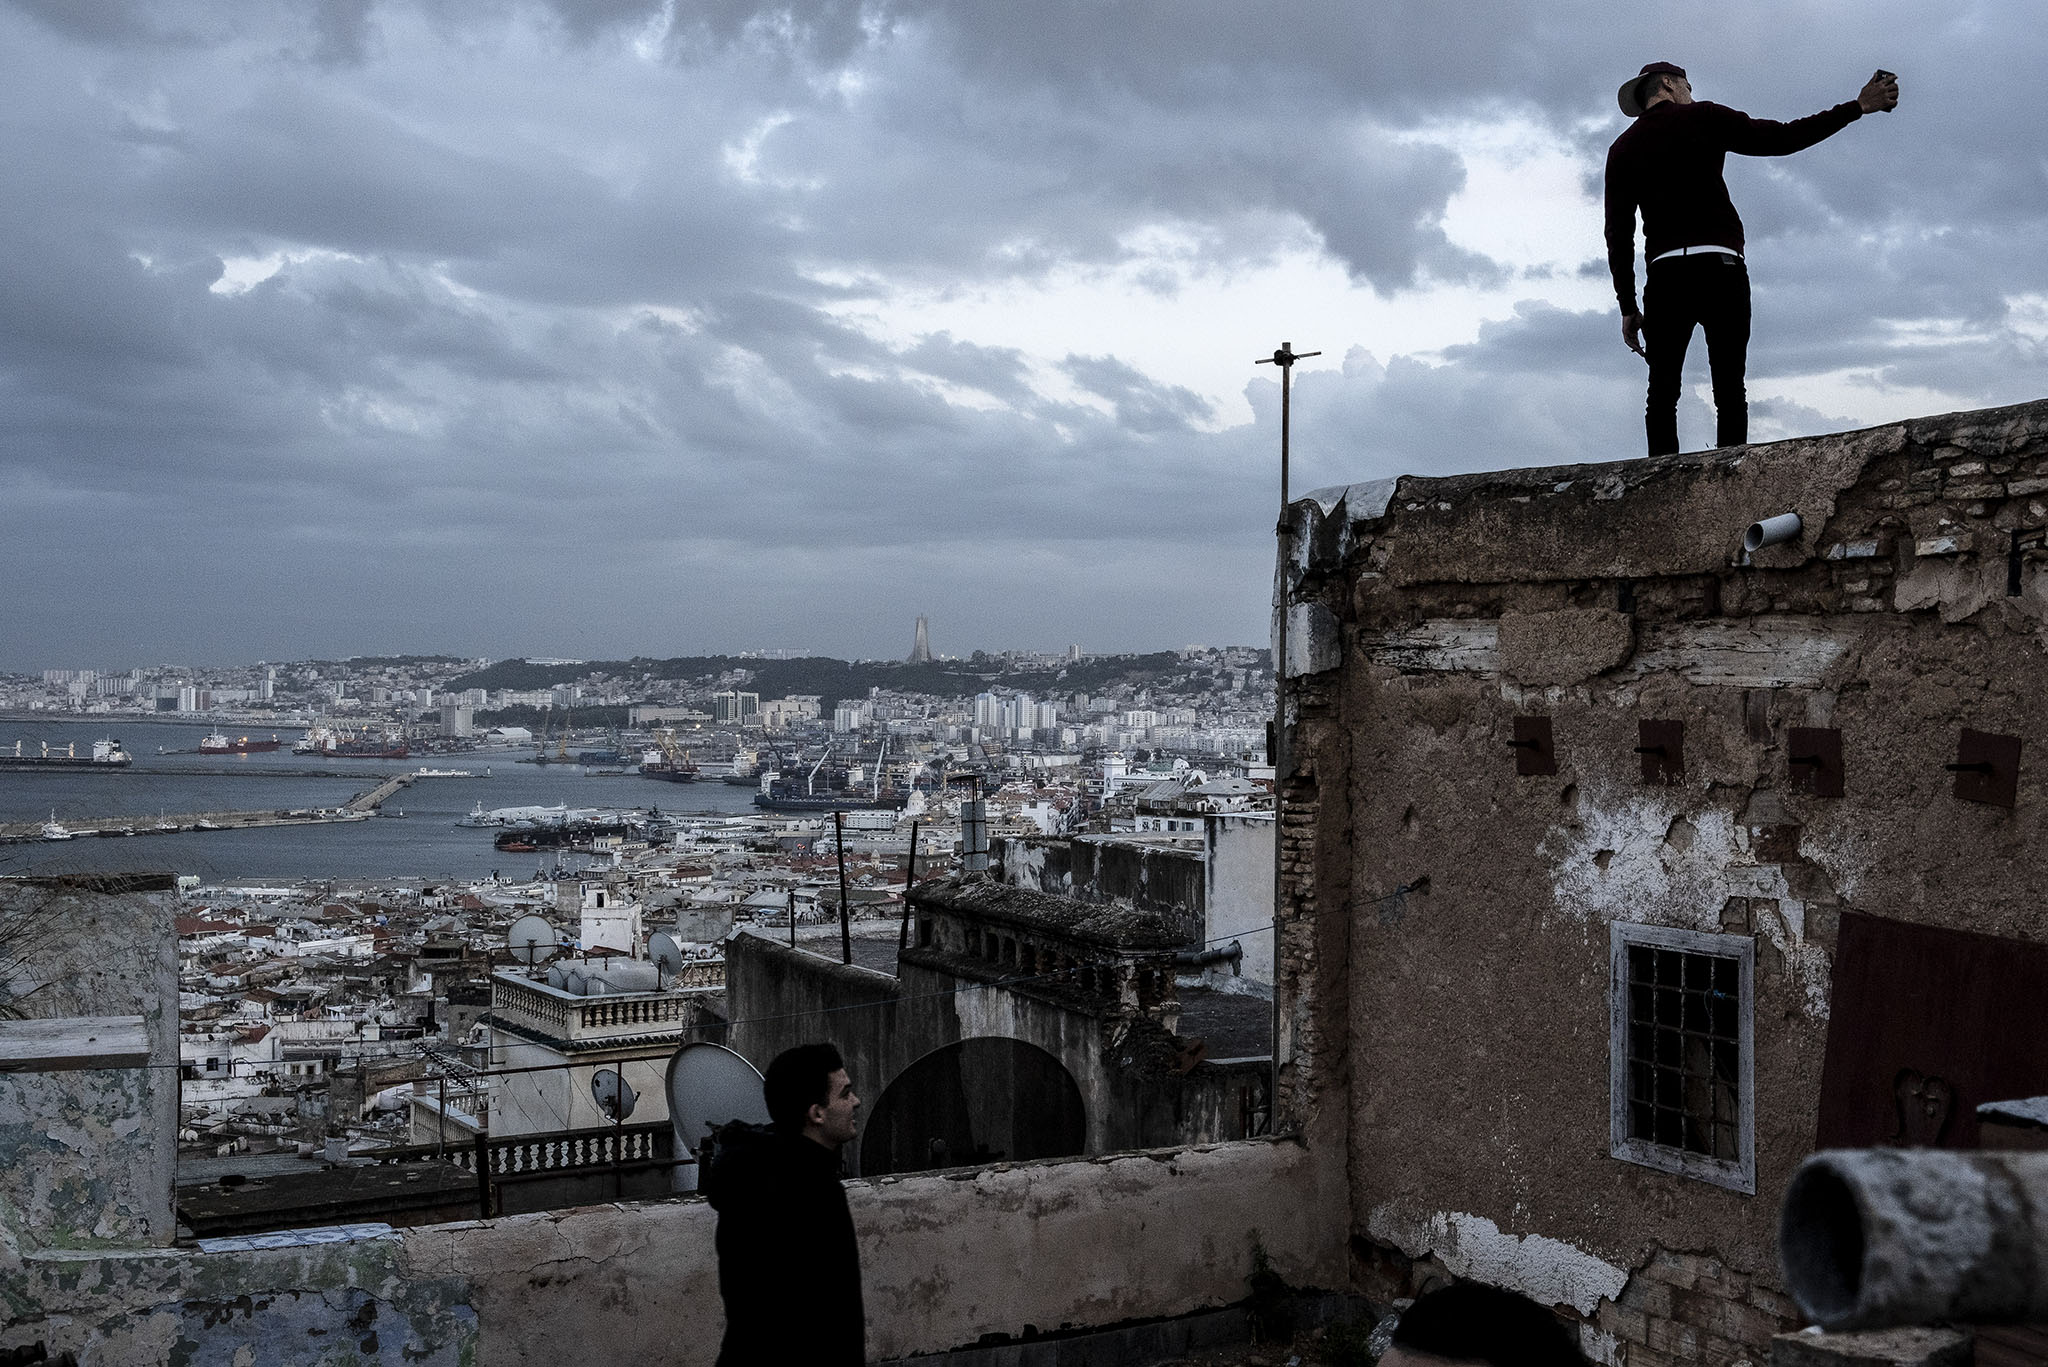 Young men gather on the roof of a home in the Casbah district of Algiers, April 6, 2019. (Ferhat Bouda/The New York Times)